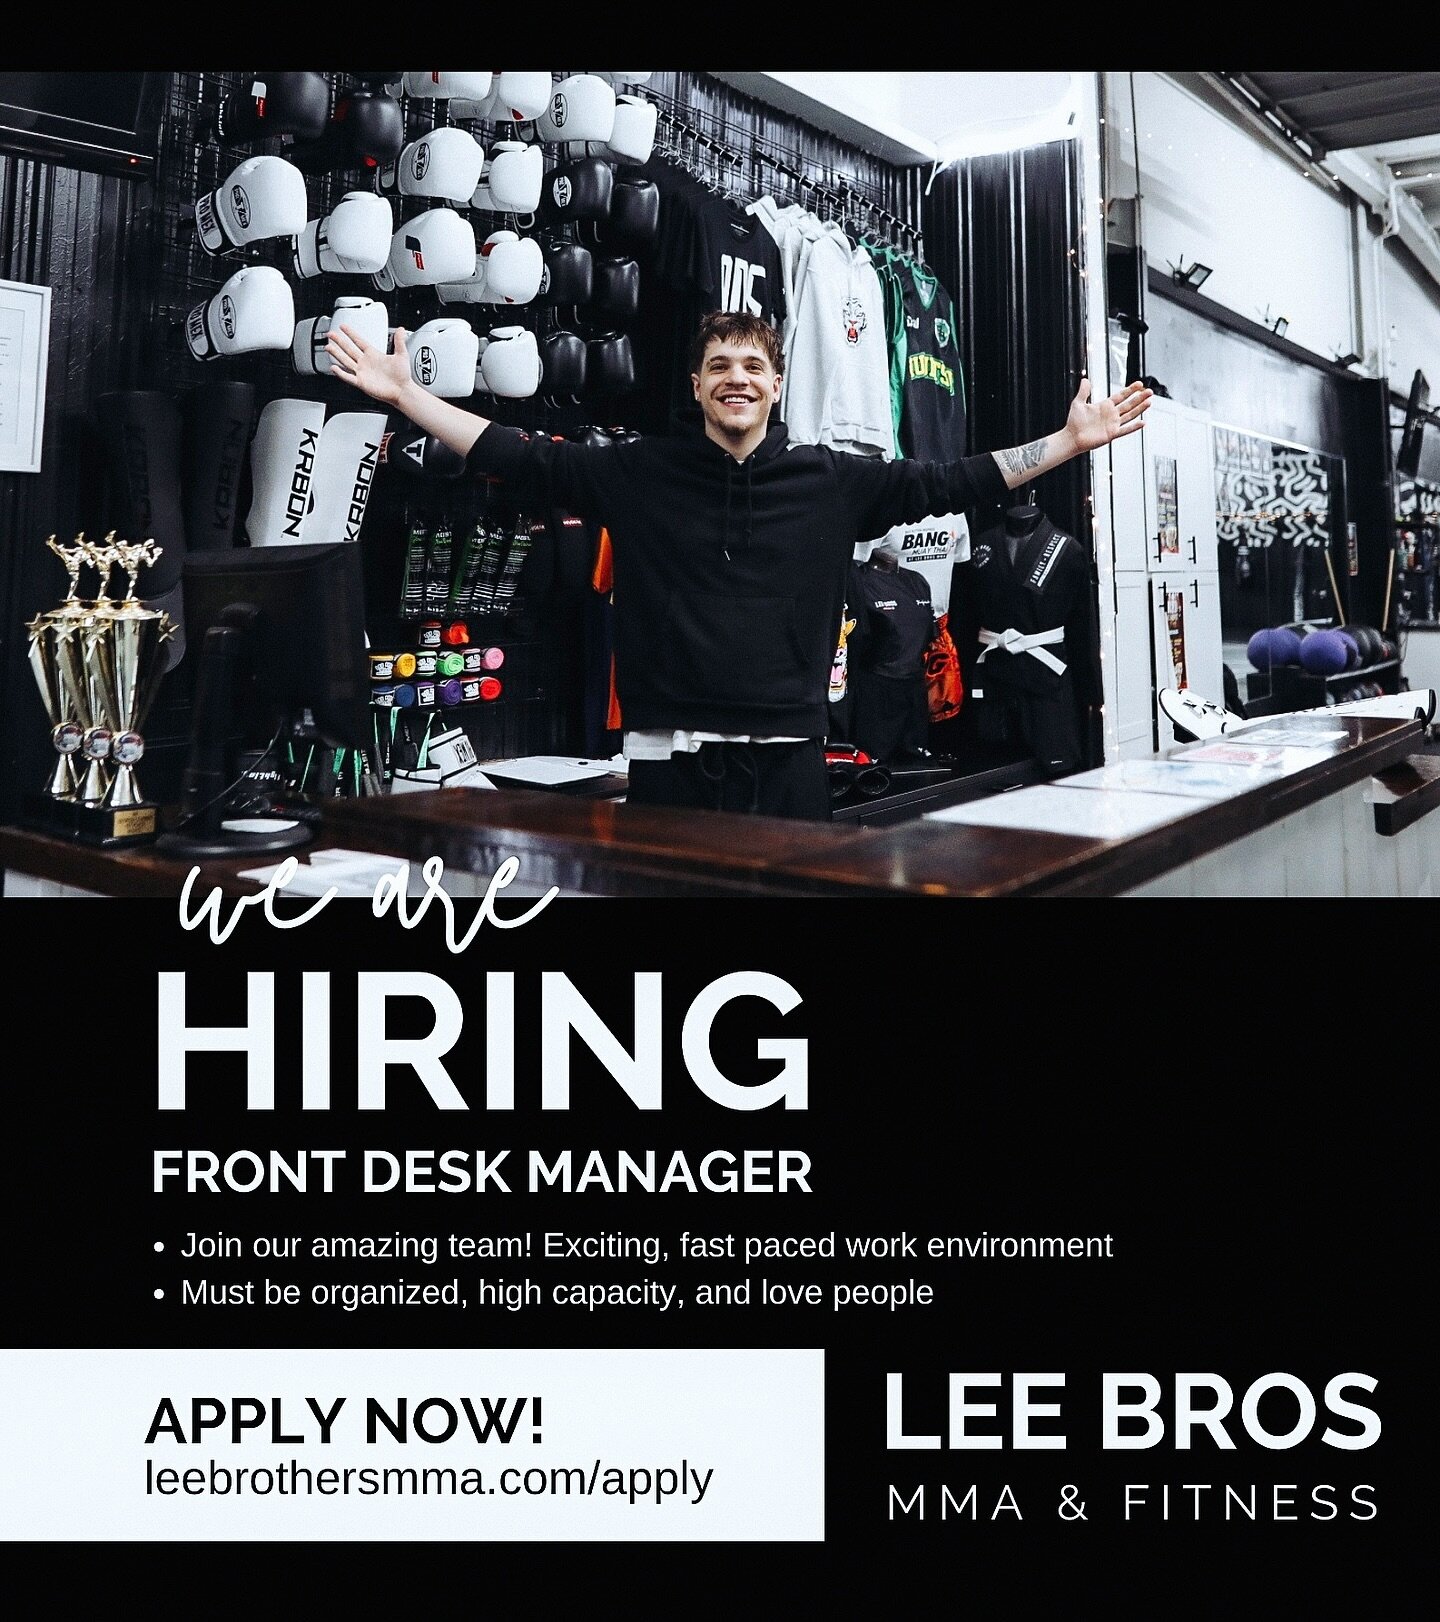 WE ARE HIRING! 🗣️

It&rsquo;s a party every day at Lee Bros! And we need more help taking care of our members. We are looking to add to our amazing team at the front desk. 

Must be organized, hard-working, and ready to work in a fast paced environm